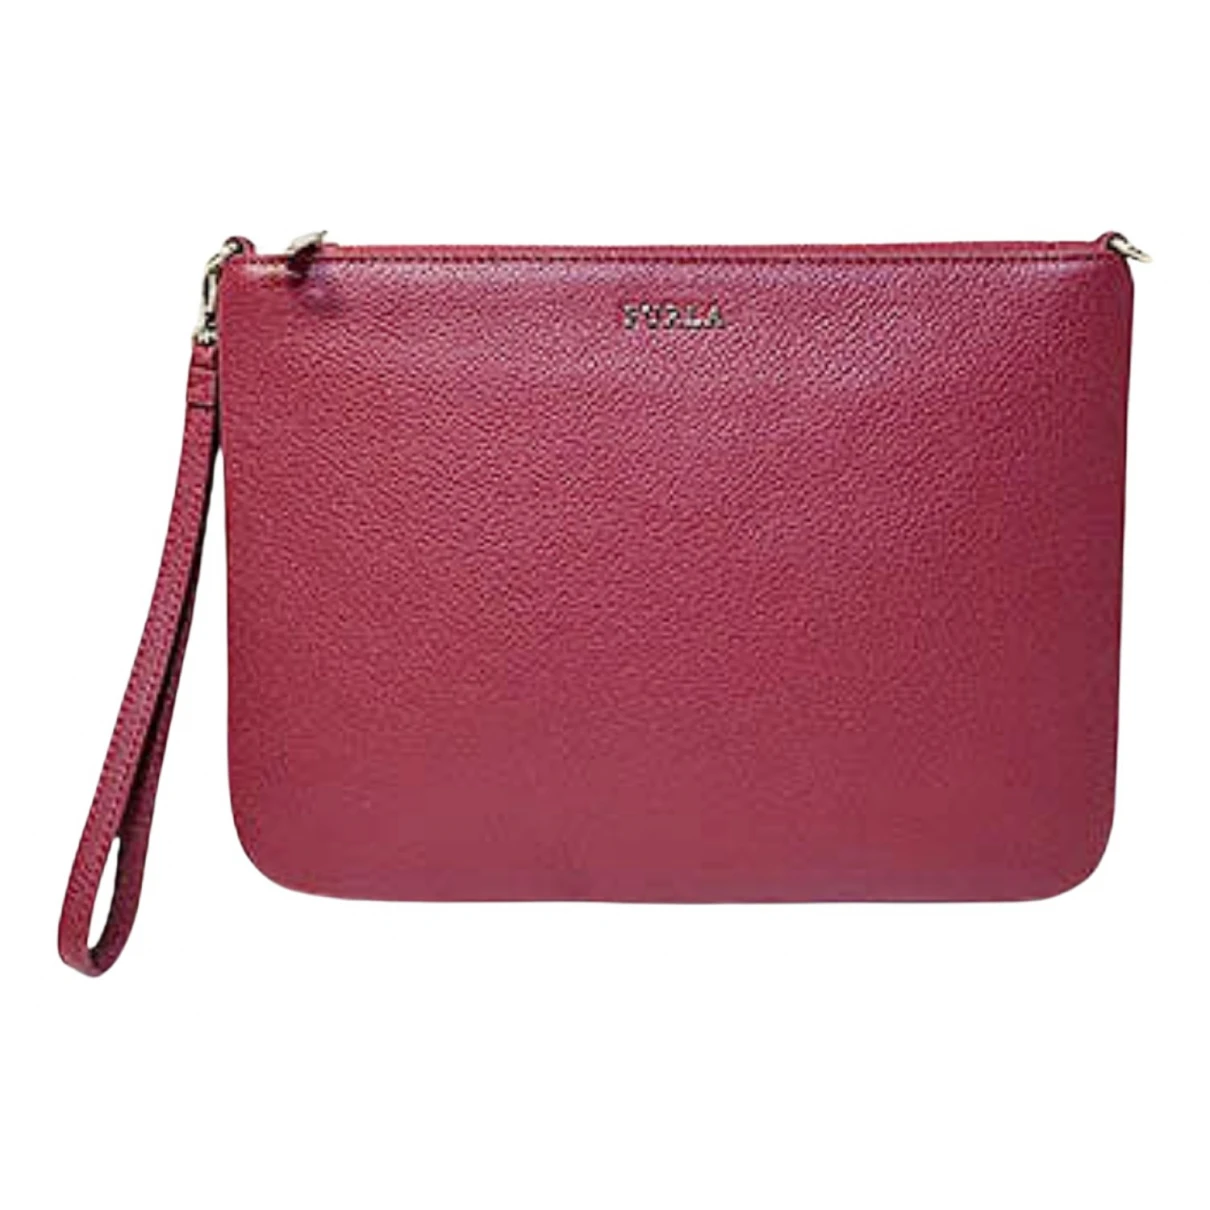 bags Furla clutch bags for Female Leather. Used condition